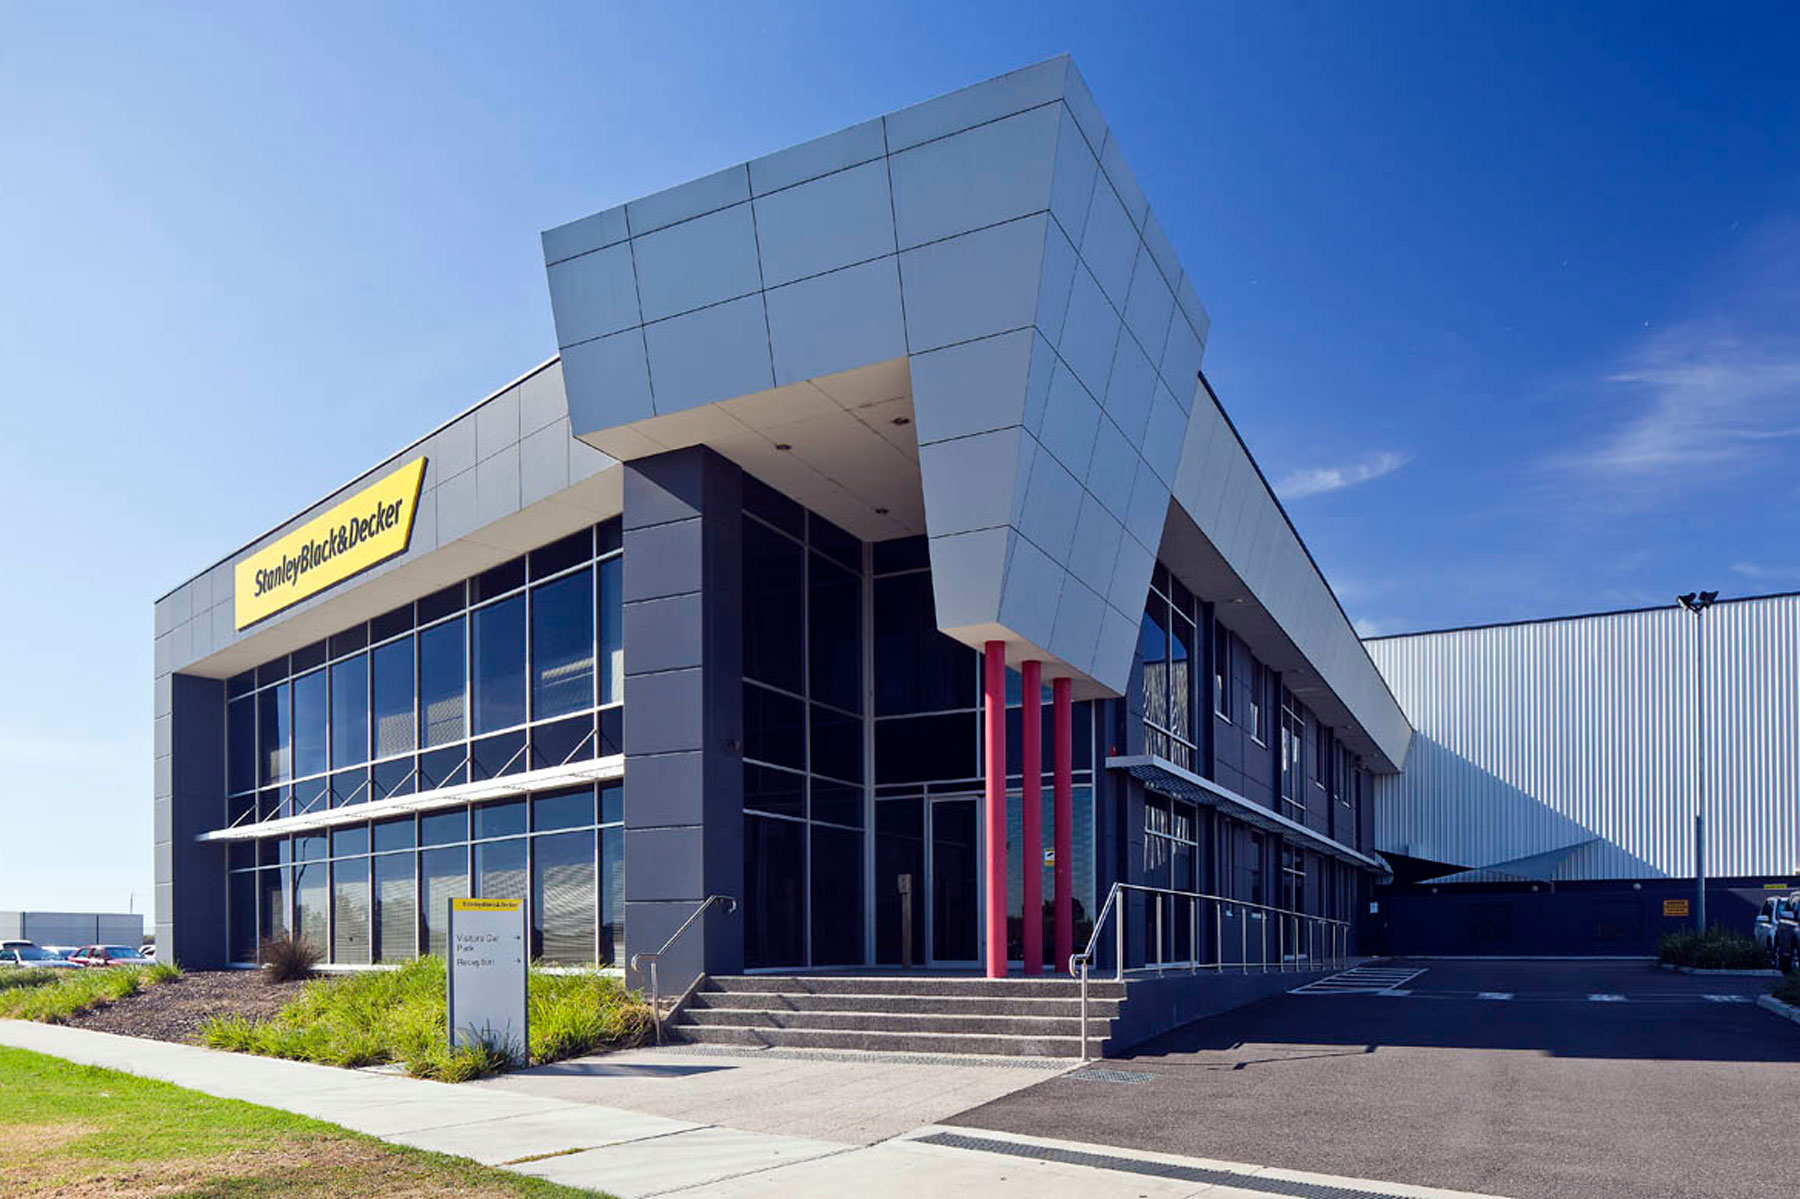 Stanley Black and Decker at Northpoint Enterprise Park in Epping